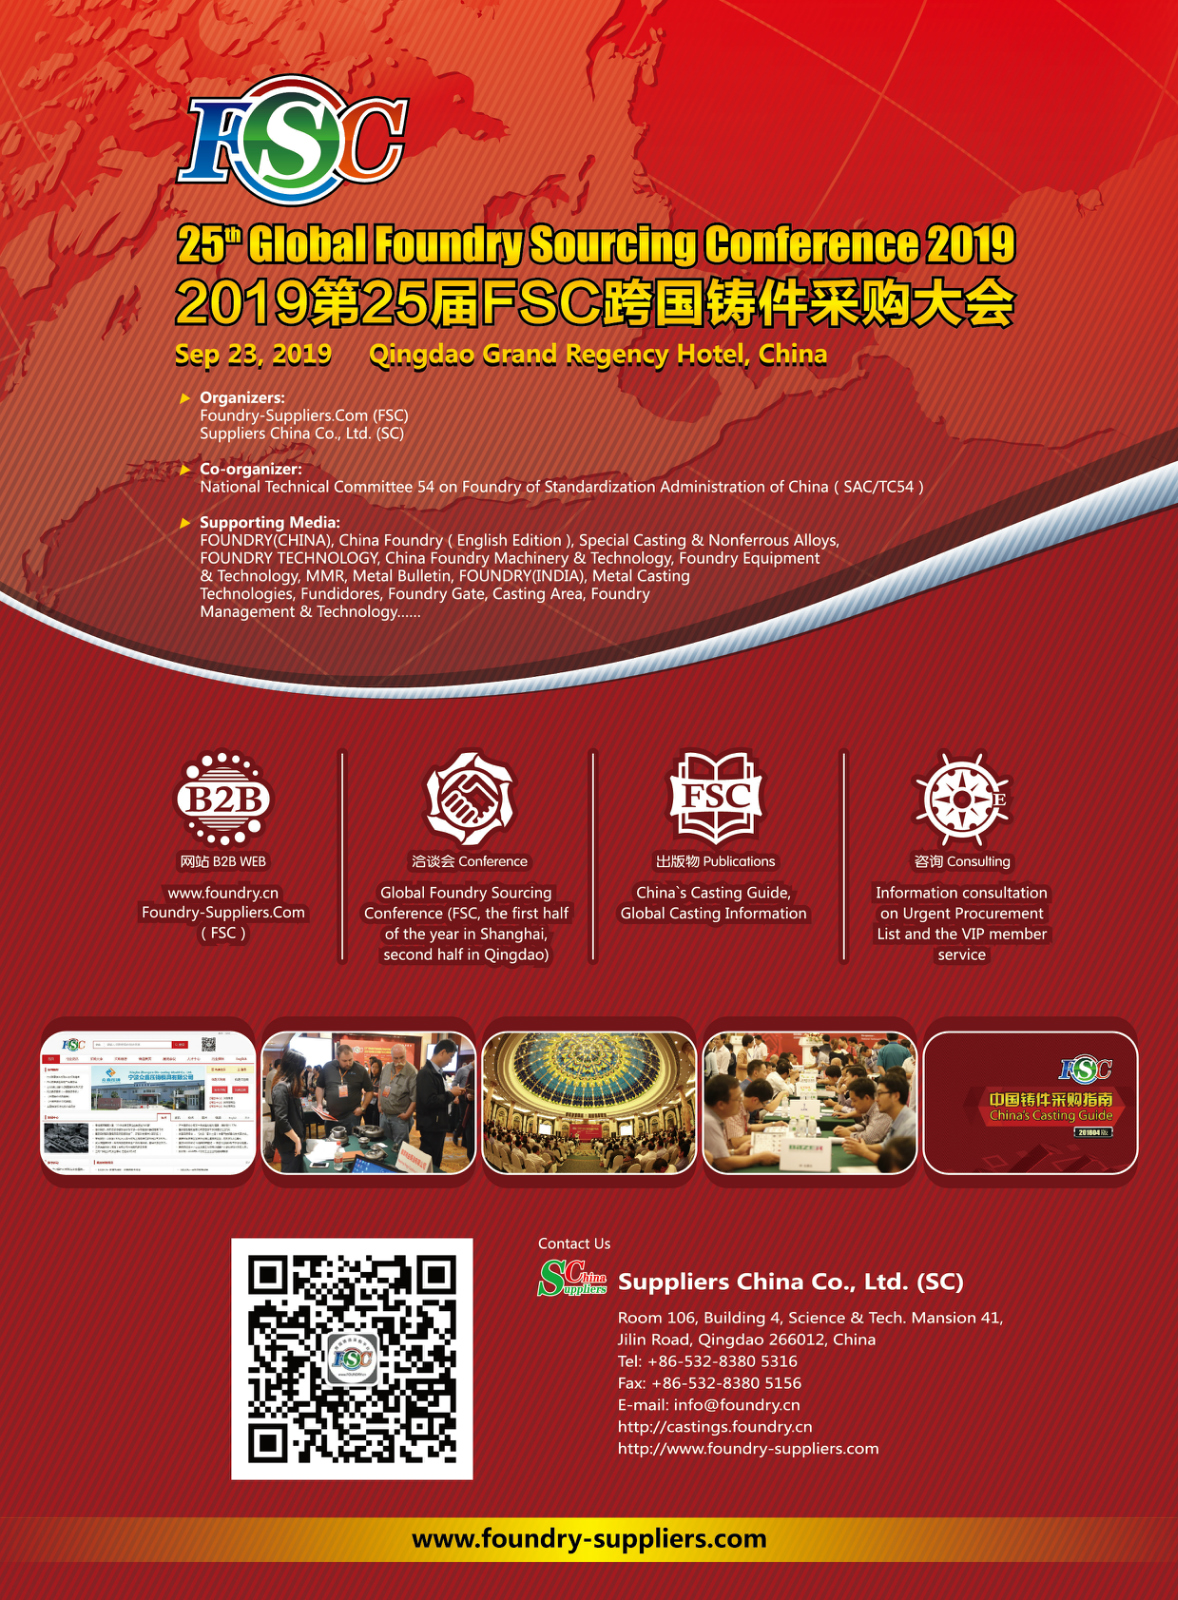 25th Global Foundry Sourcing Conference 2019, Qingdao Grand Regency Hotel, Shandong, China